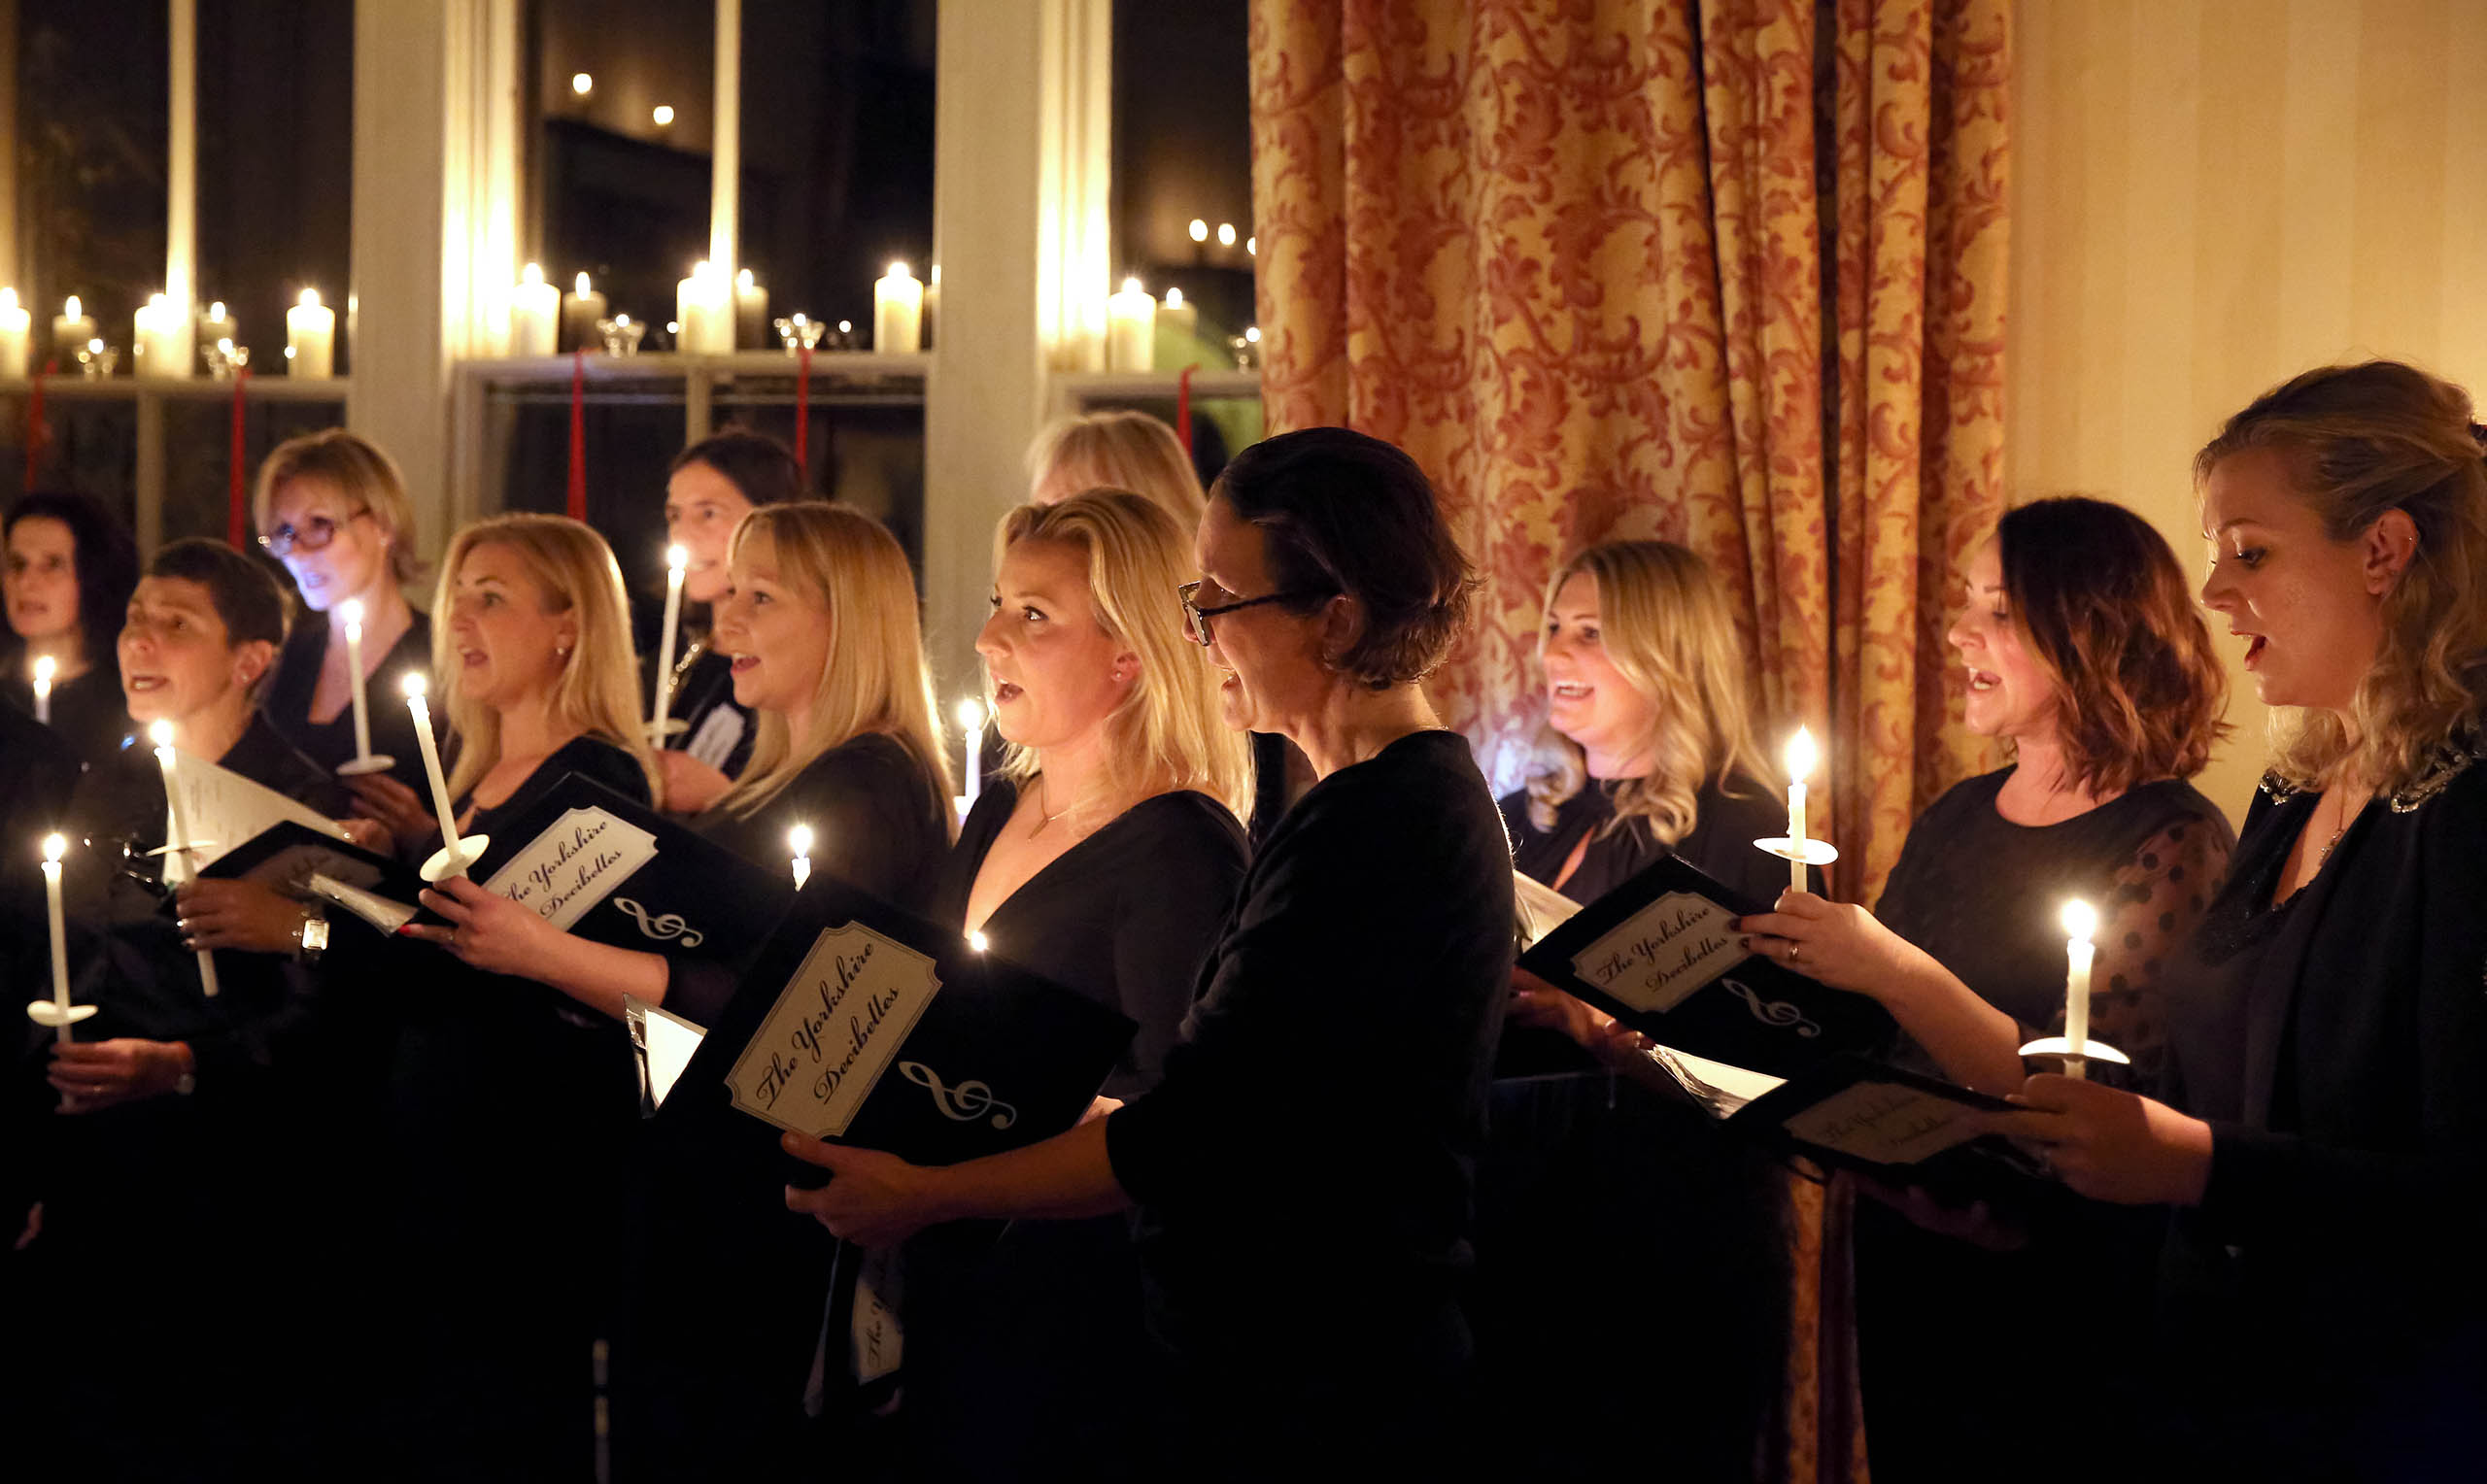 A choir singing in candlelight during a charity event at Swinton Park Hotel in North Yorkshire